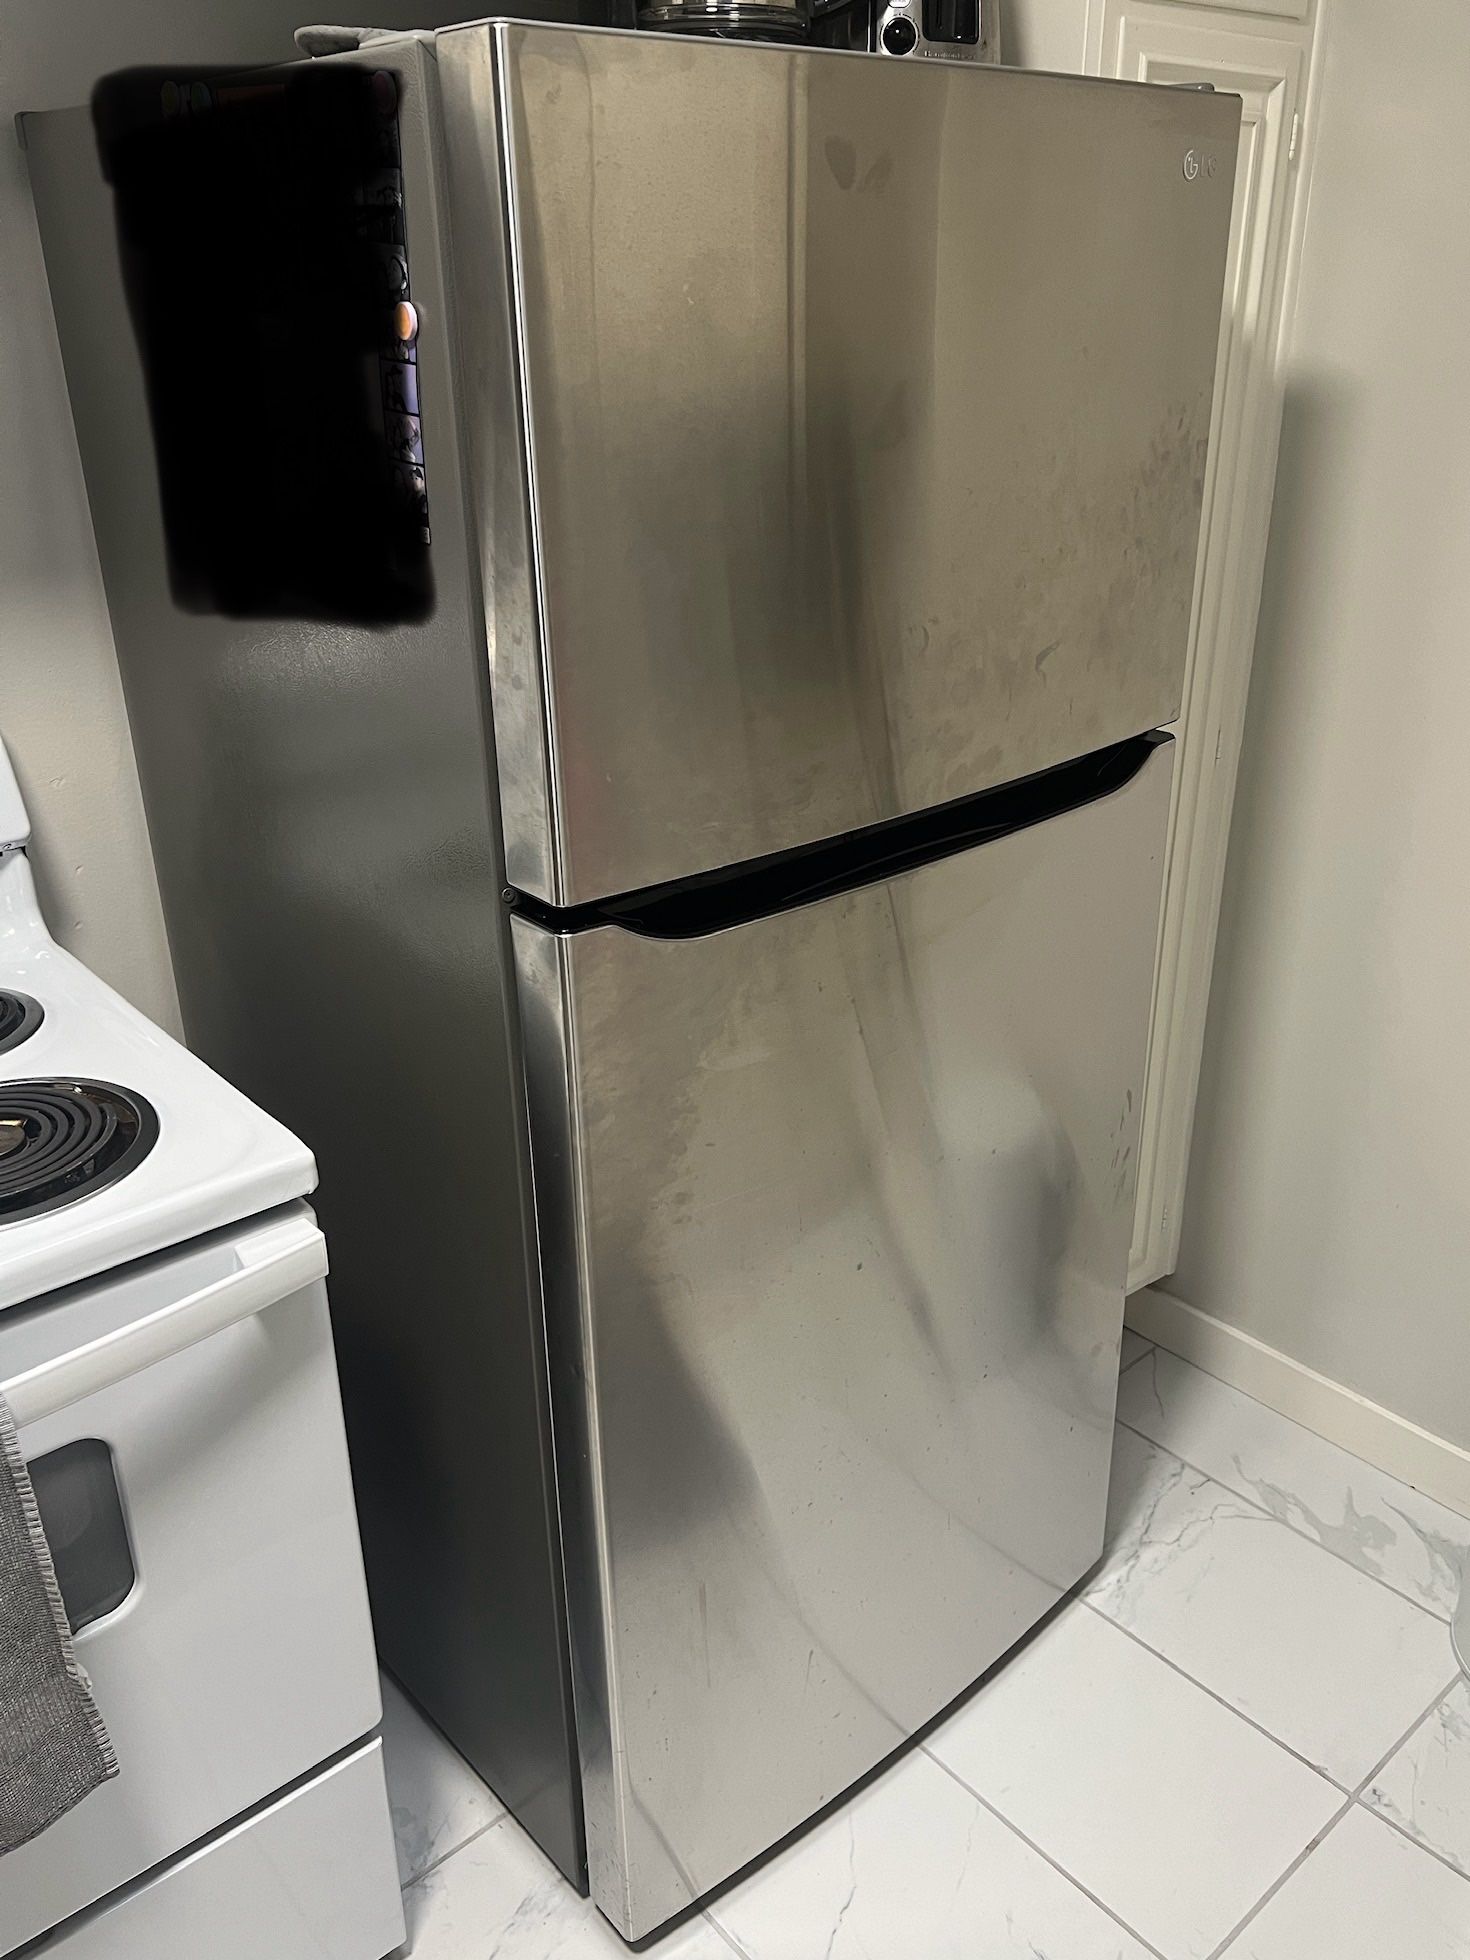 Used LG Refrigerator for Sale! 